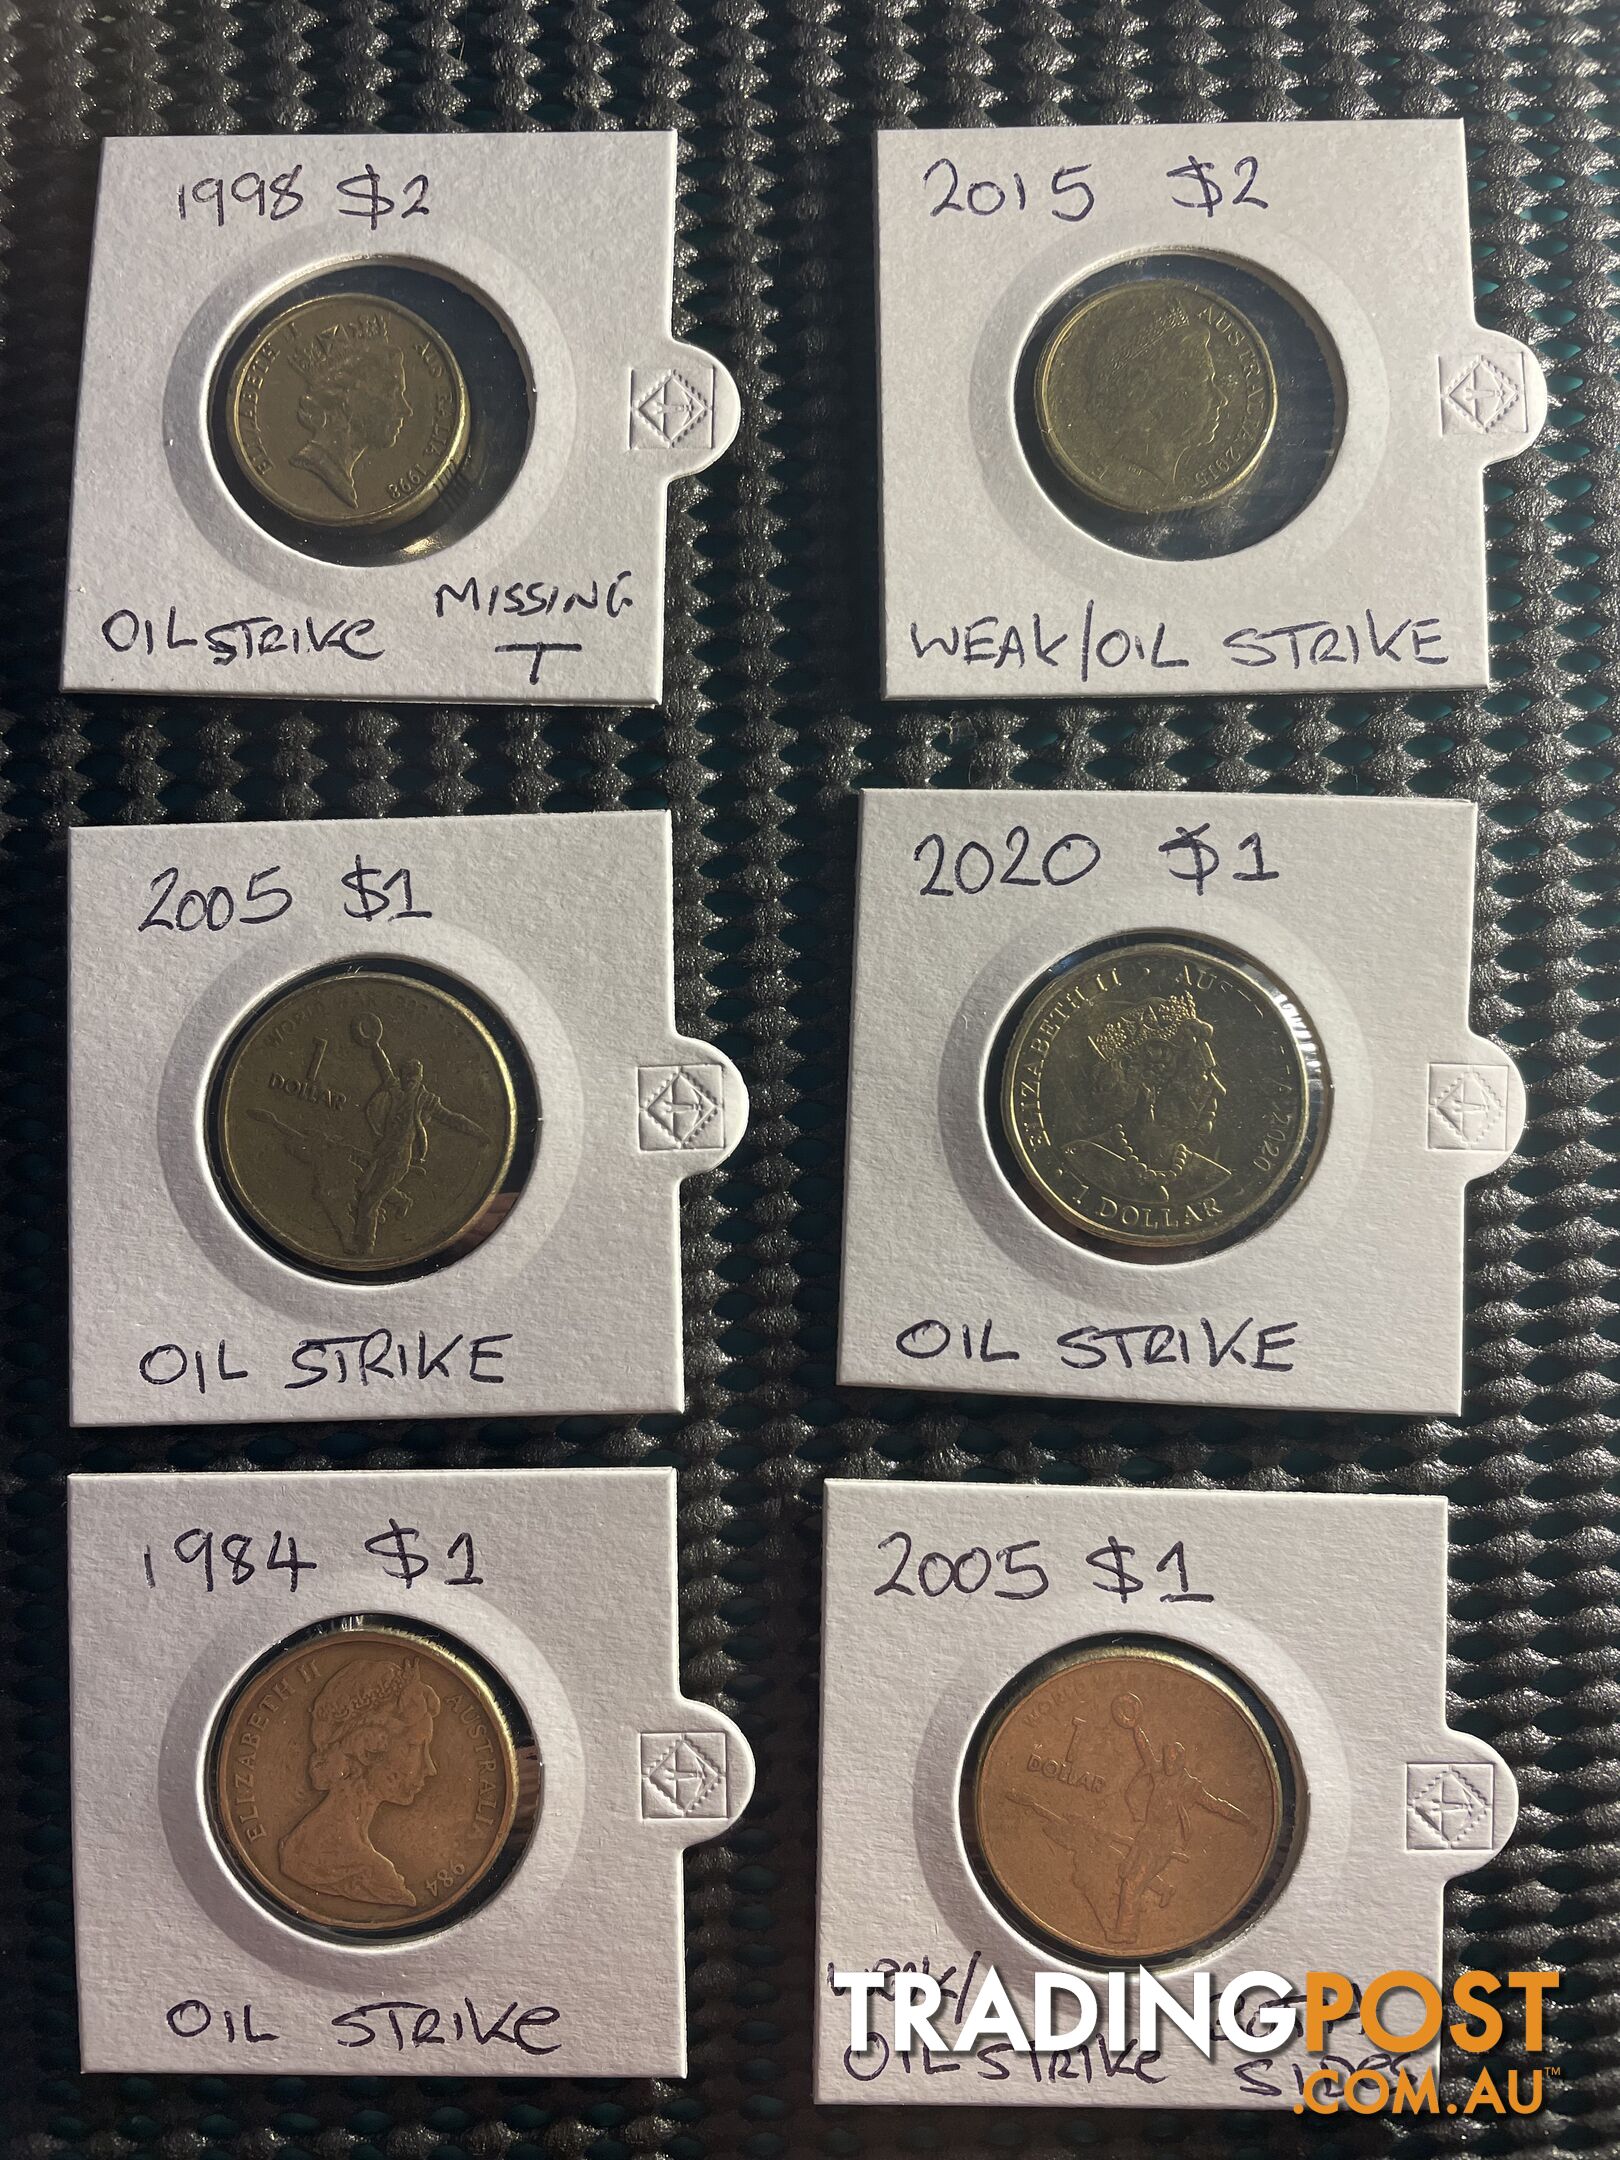 Collectable Error Coins various Weak/Oil Strike and CUD Coins for sale